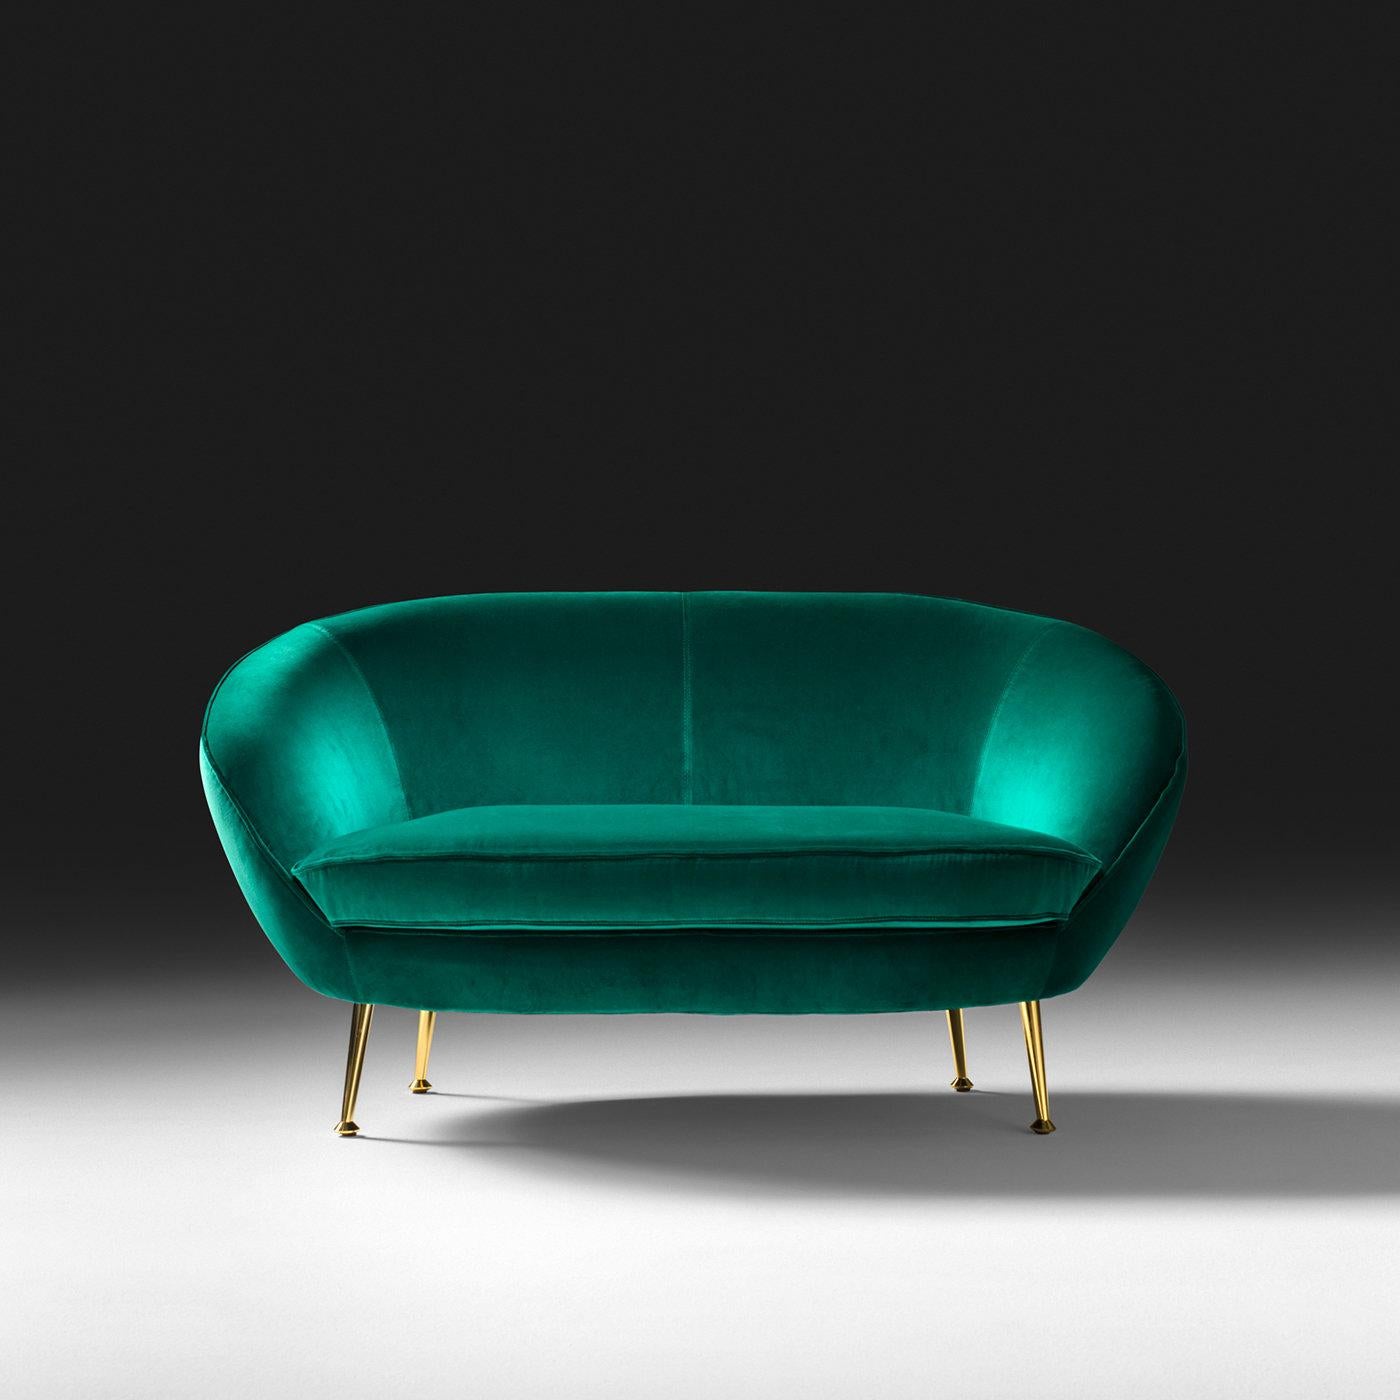 This modern sofa boasts a unique and bright personality, thanks to its vivid emerald green upholstery and incredible design. It features a beechwood structure with a fire-resistant expanded polyurethane cover. Metal feet with a golden finish